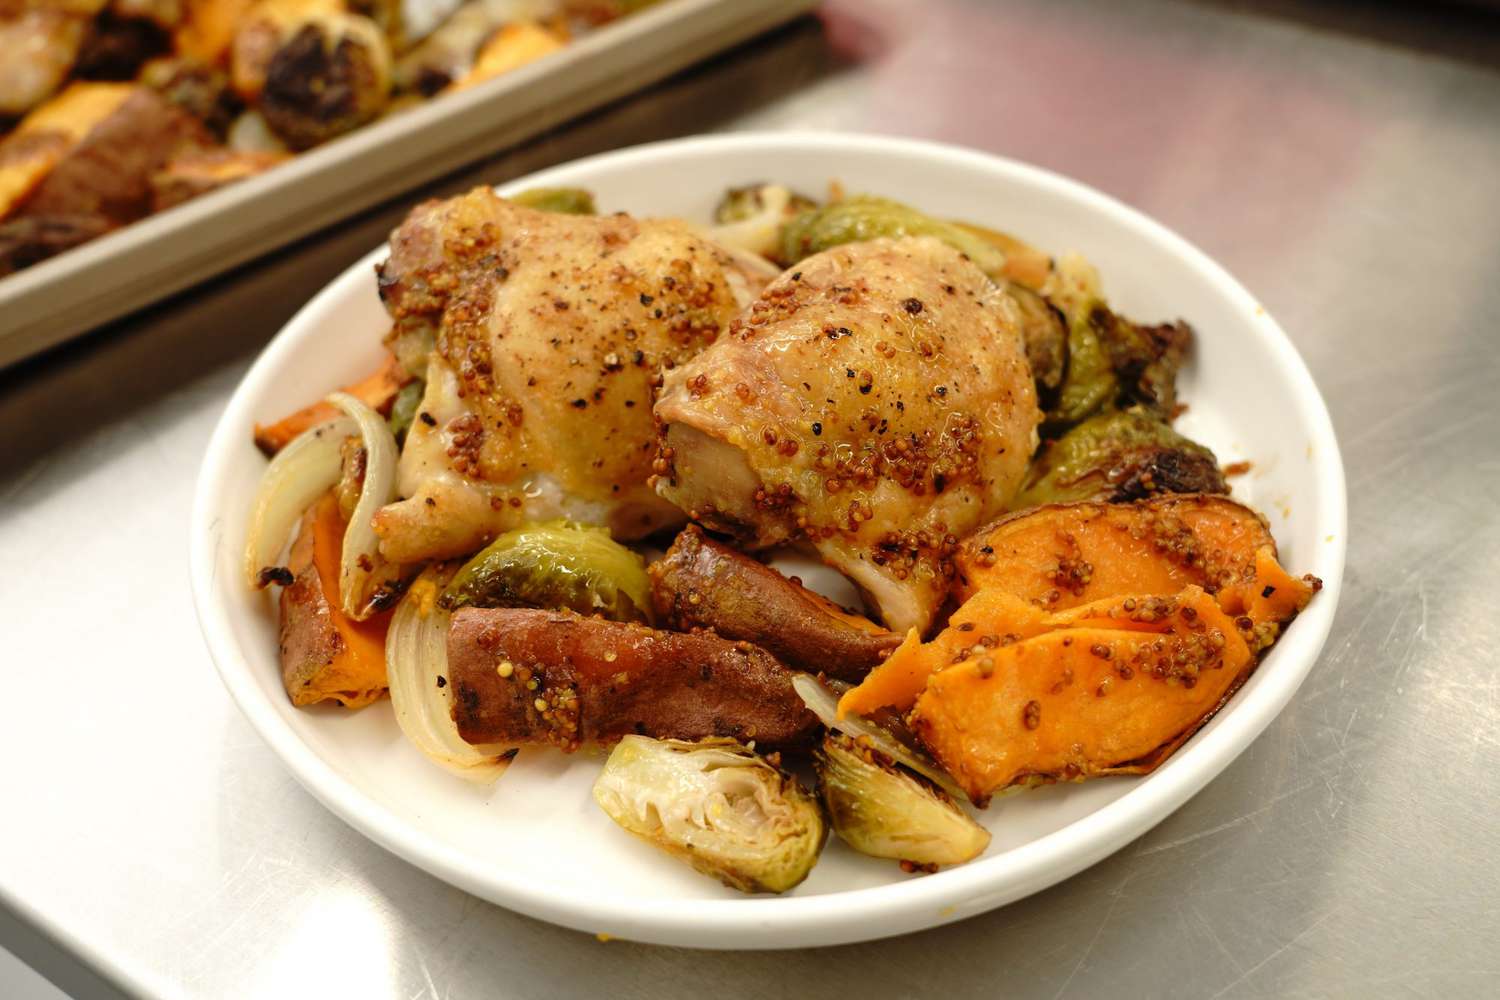 sheet pan chicken and veggies with mustard vinaigrette recipe served with Brussels sprouts, onions, and sweet potatoes